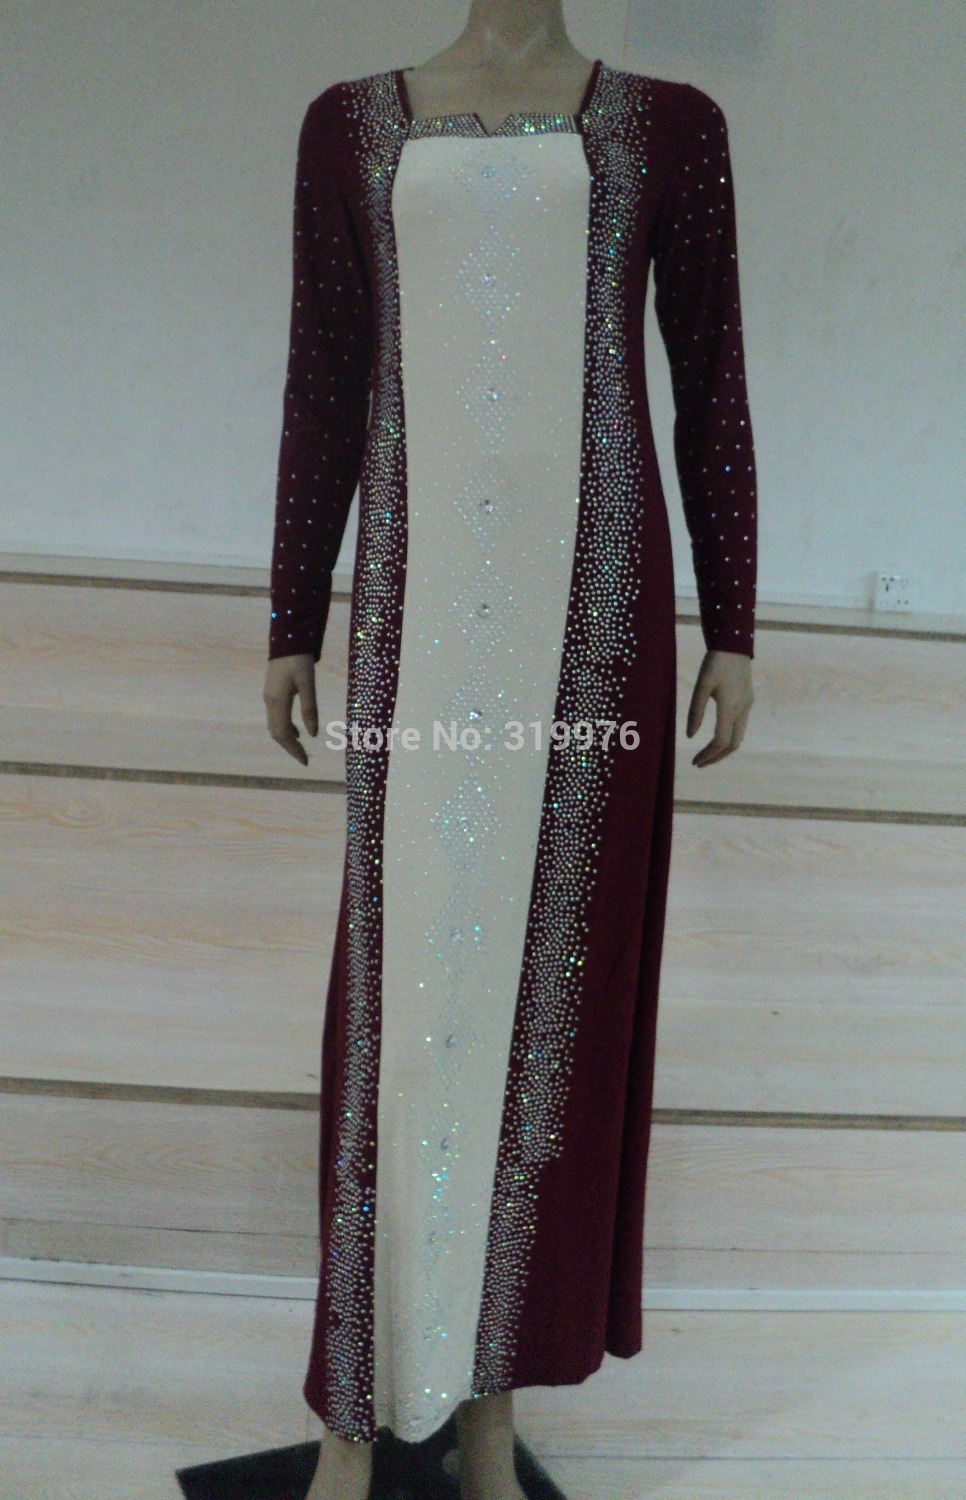 Download this Elegant Islamic Wear... picture